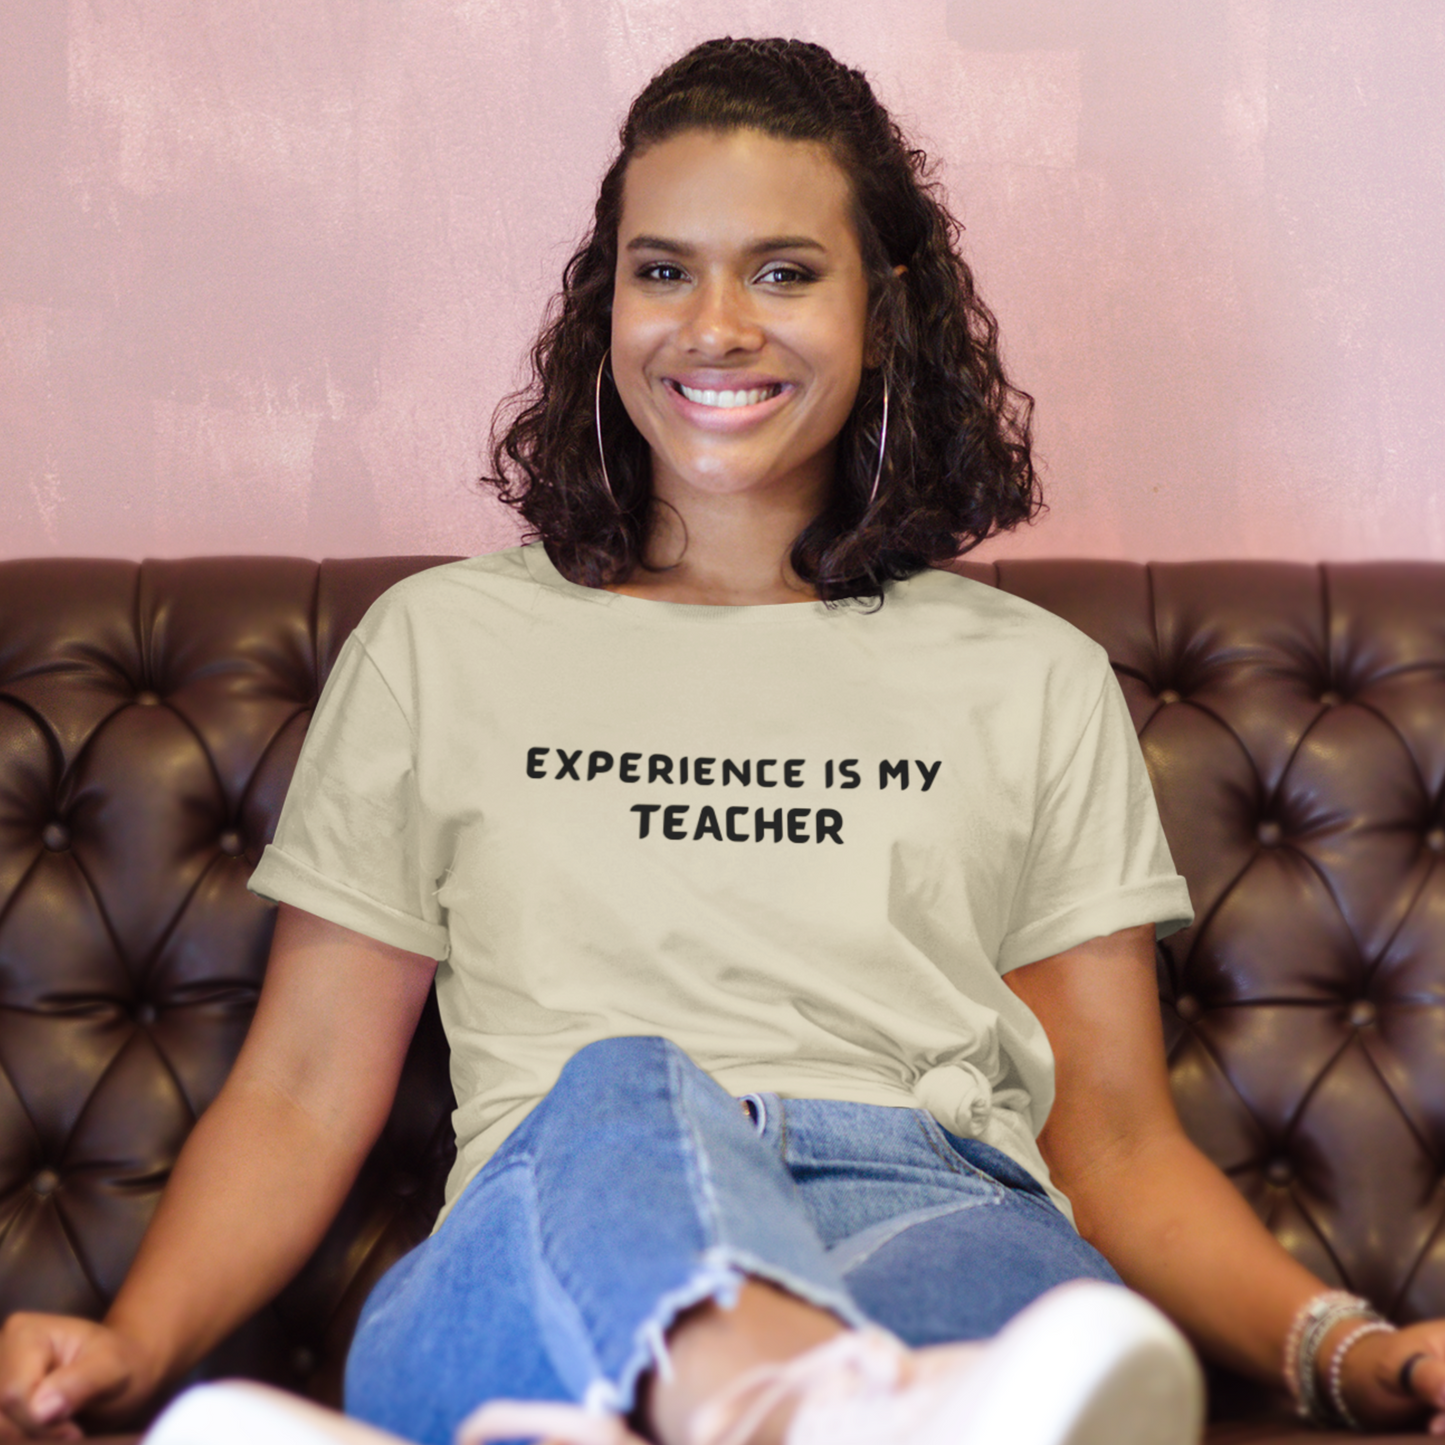 Experience is my teacher unisex t shirt gift, t shirt gift with inspirational words